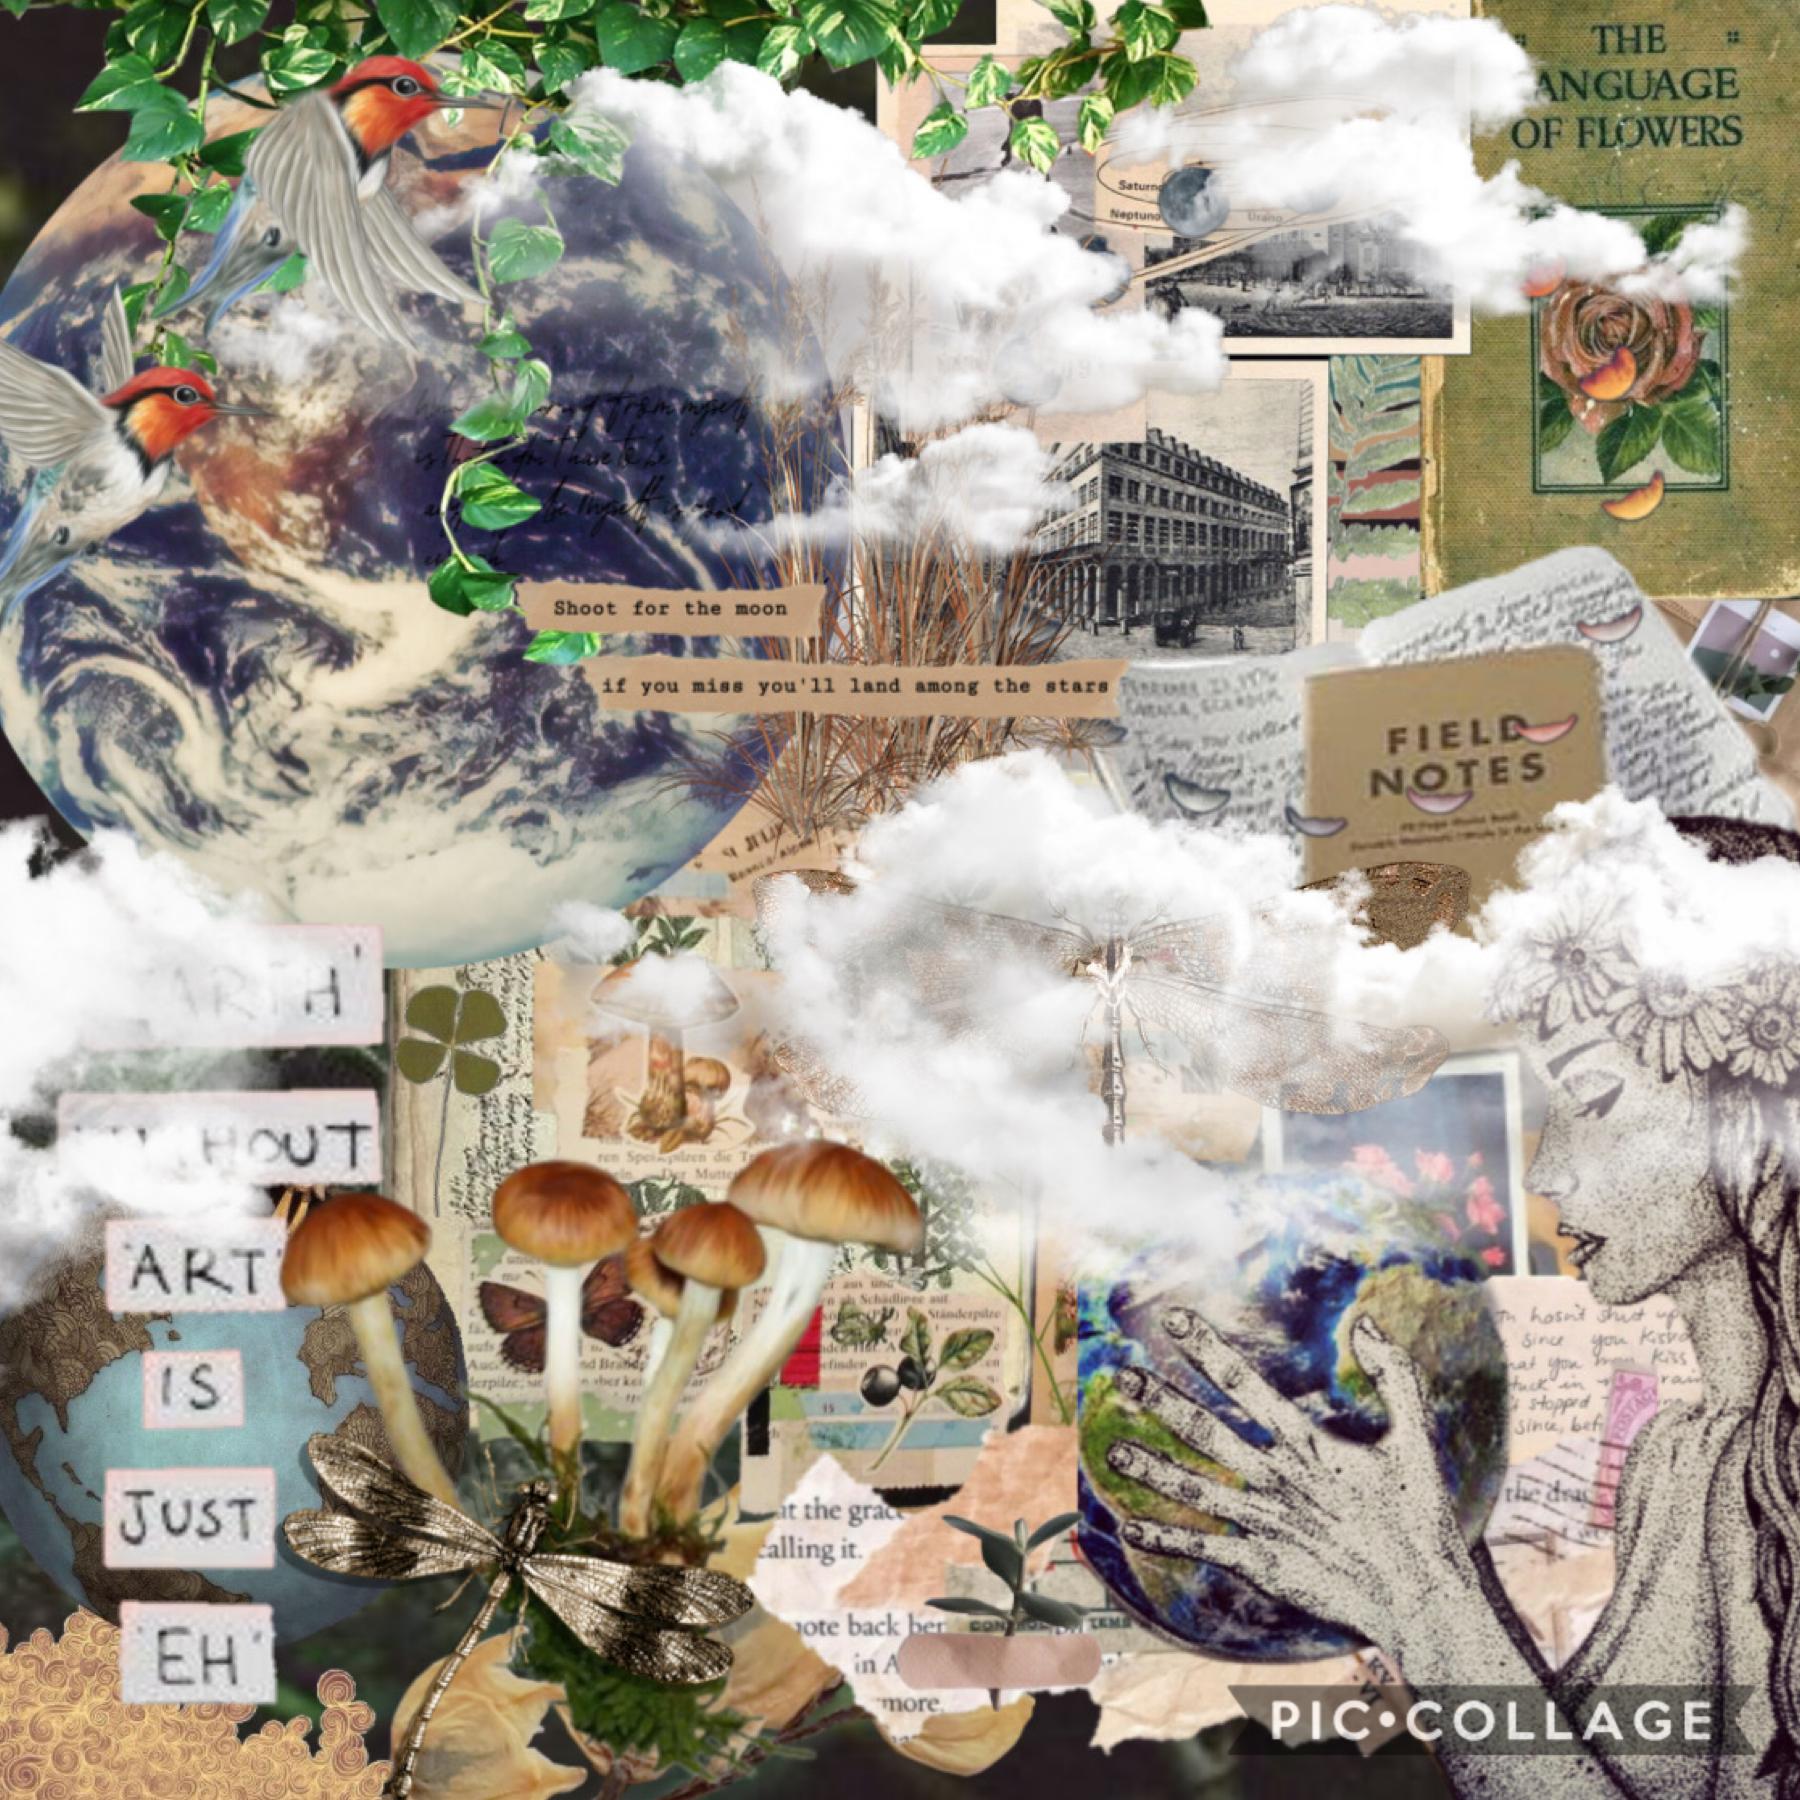 🌎Happy earth day 🌍 (click)

This collage is kind of all over the place but that’s fine